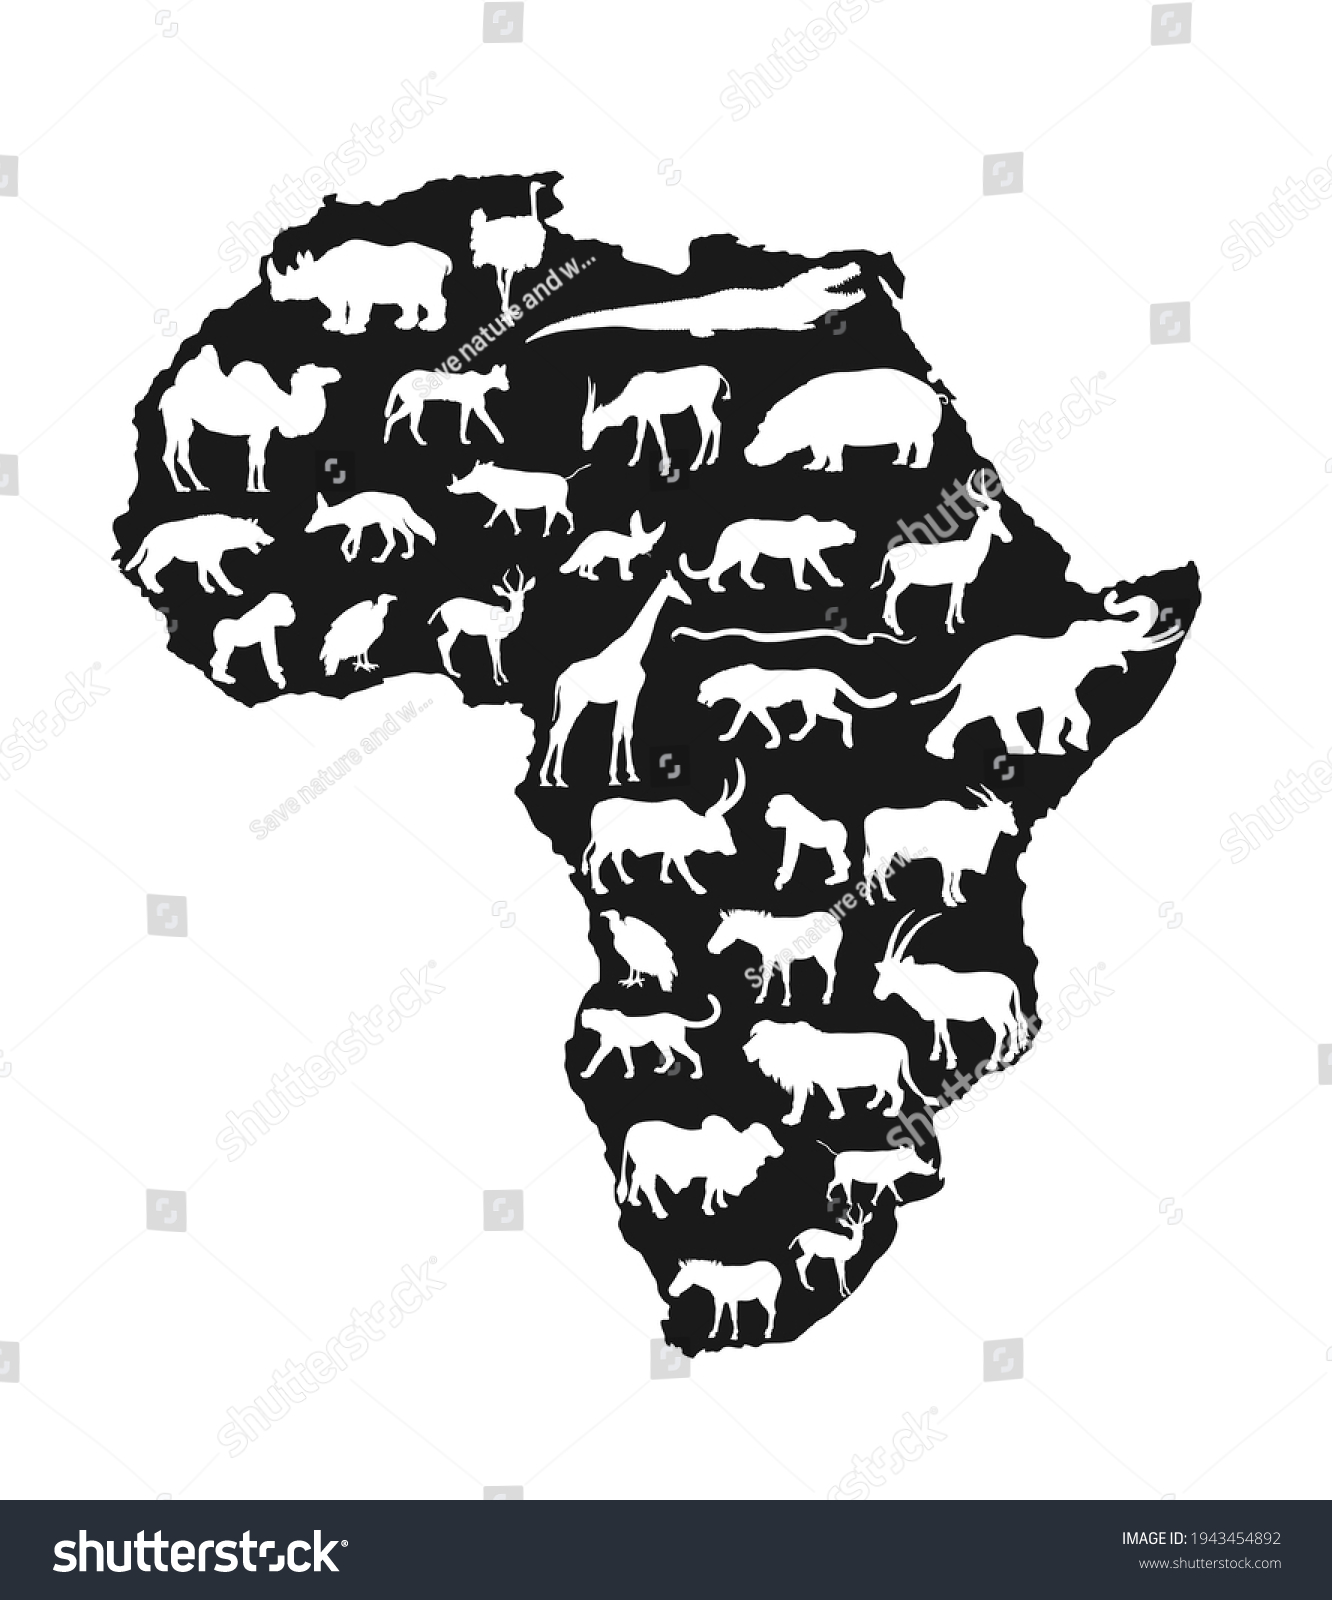 Continent Map Africa Vector Silhouette Wild Stock Vector Royalty Free 1943454892 Shutterstock 5373